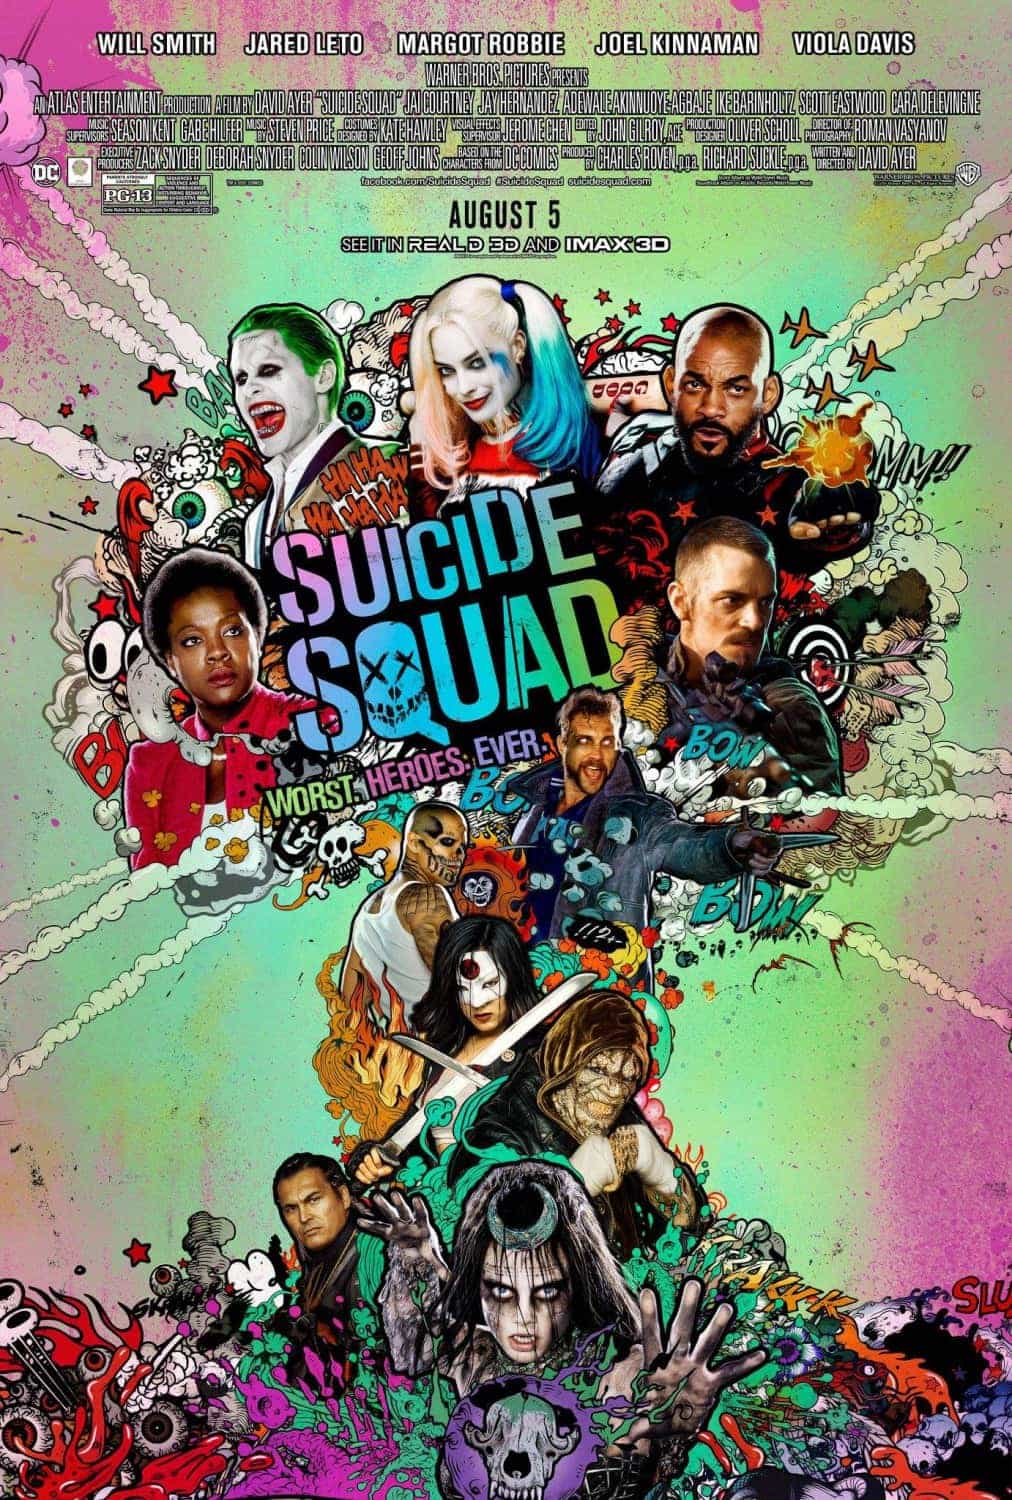 UK Box Office Weekend 5th July 2016: Suicide Squad easily takes the top spot on debut